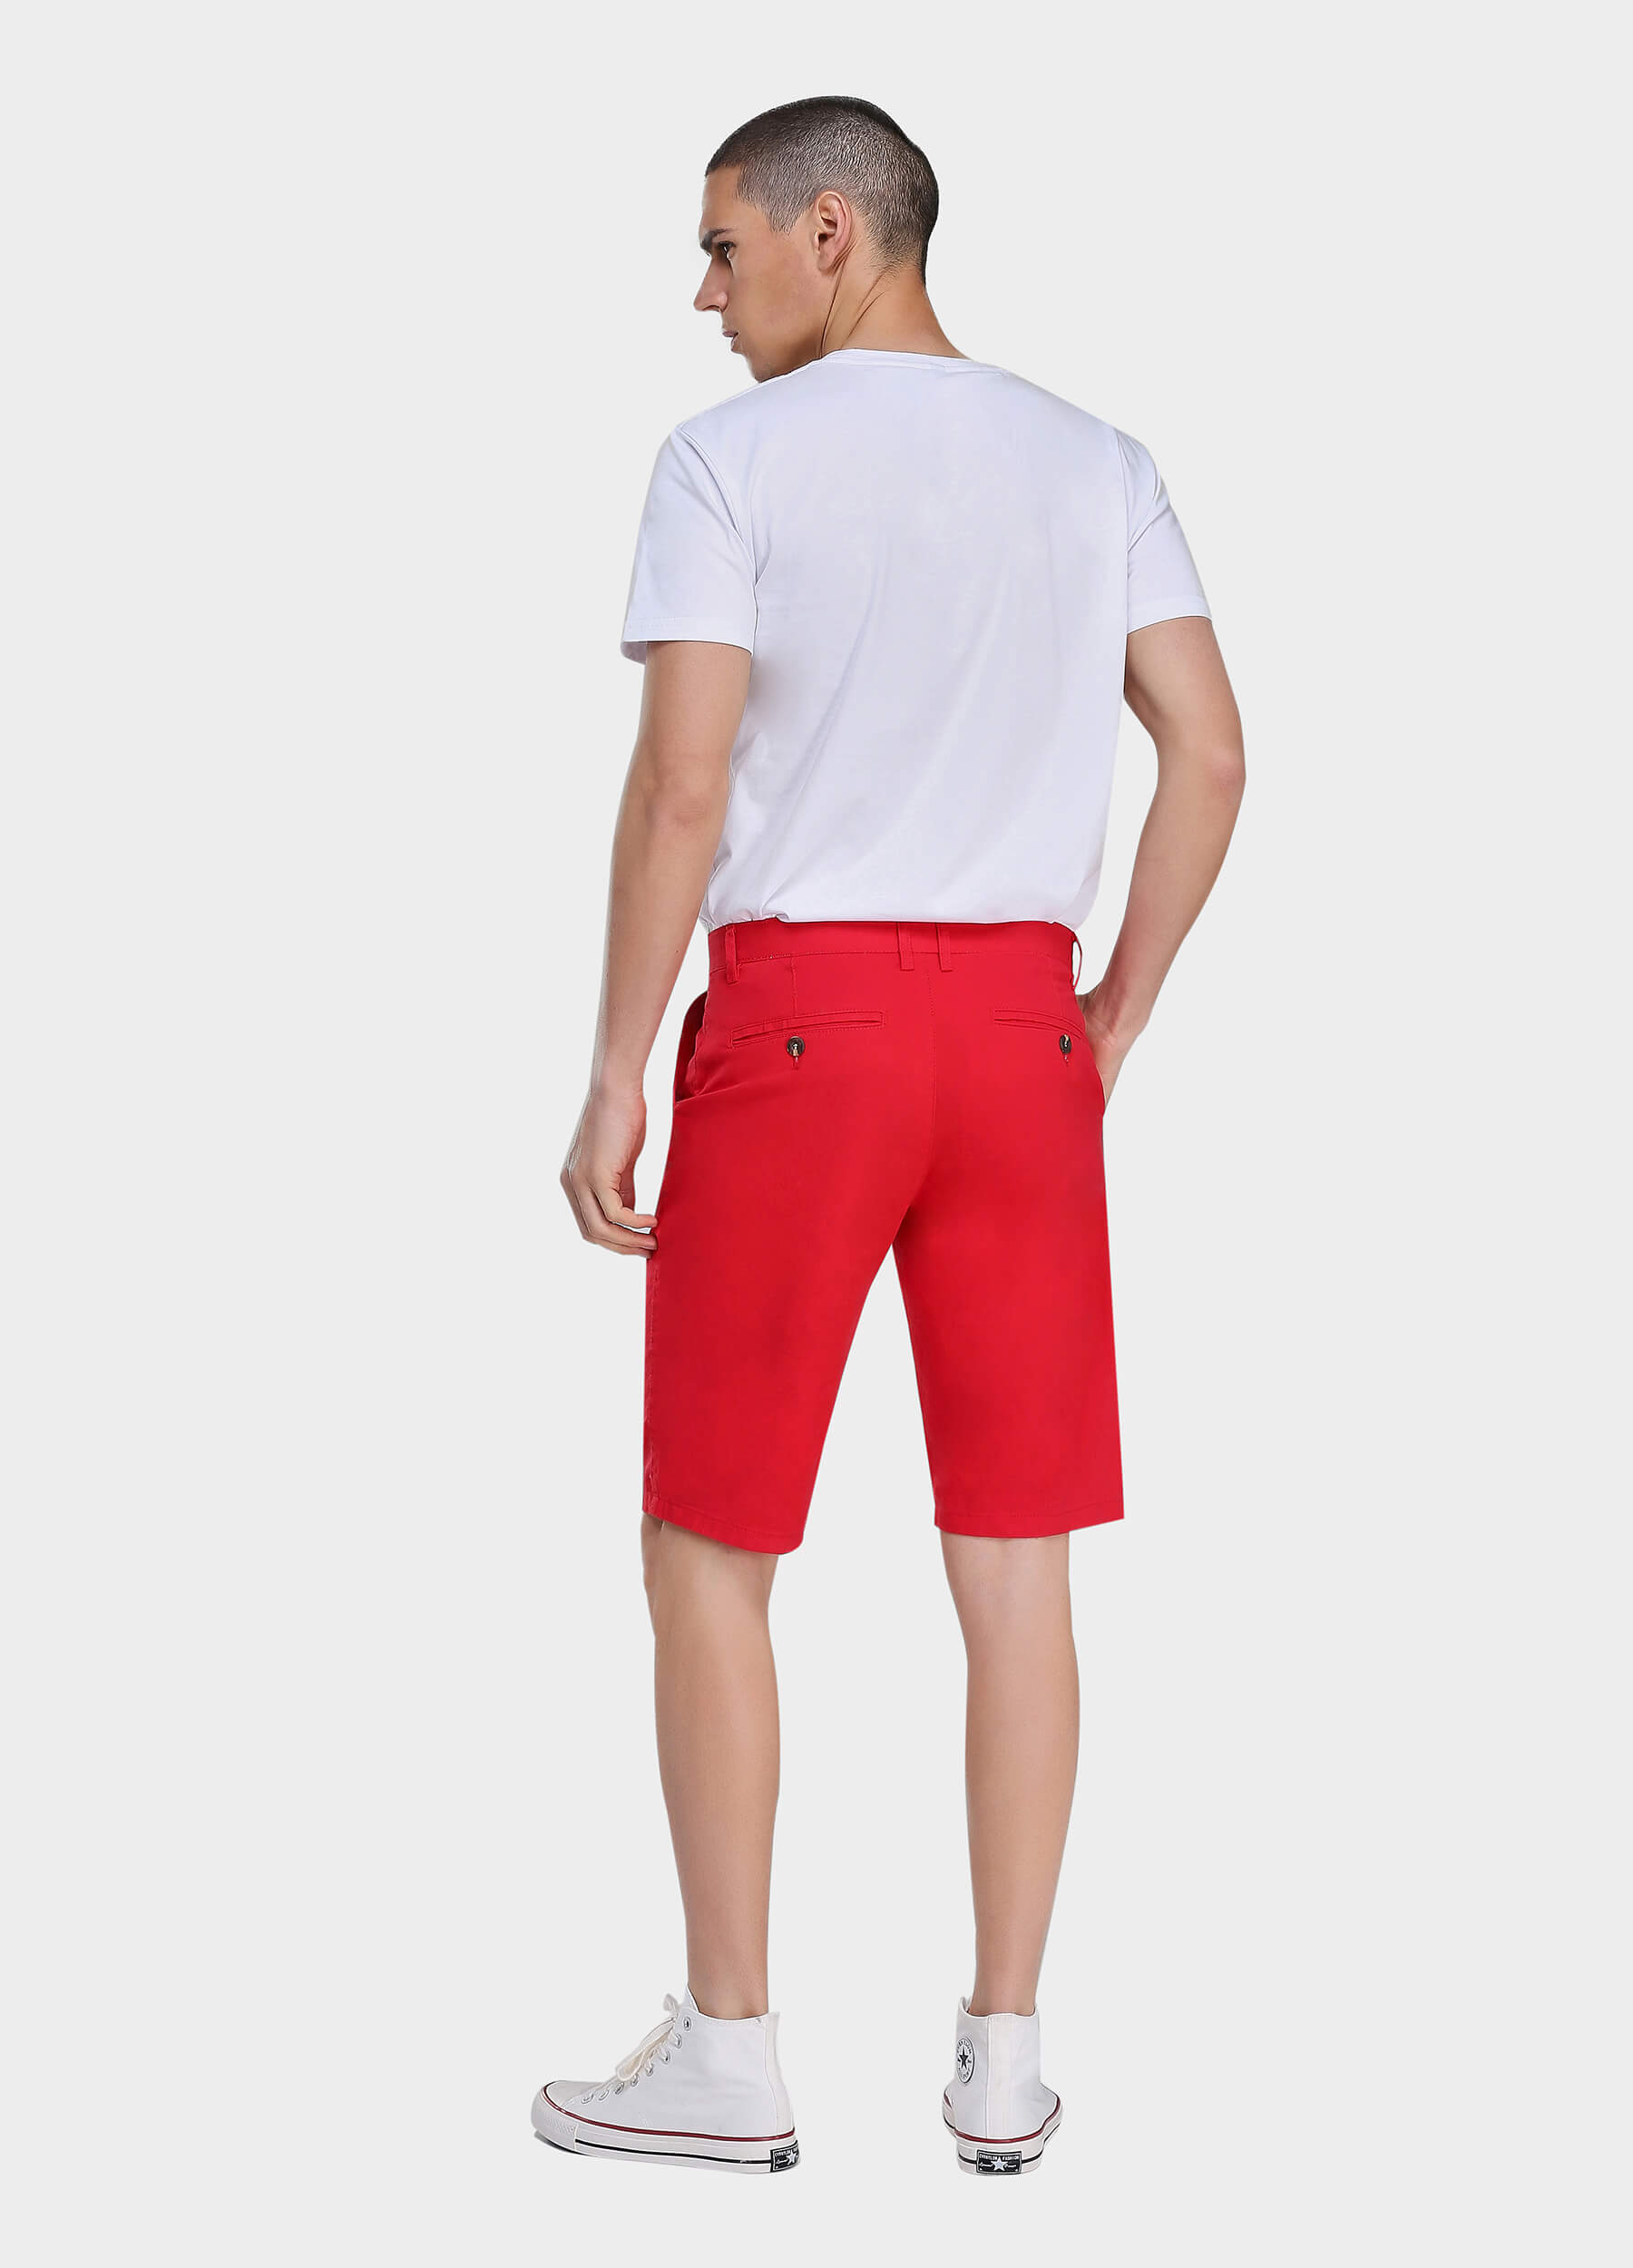 Men's Casual Zipper Fly Button Solid Shorts with Slant Pocket-Red back view